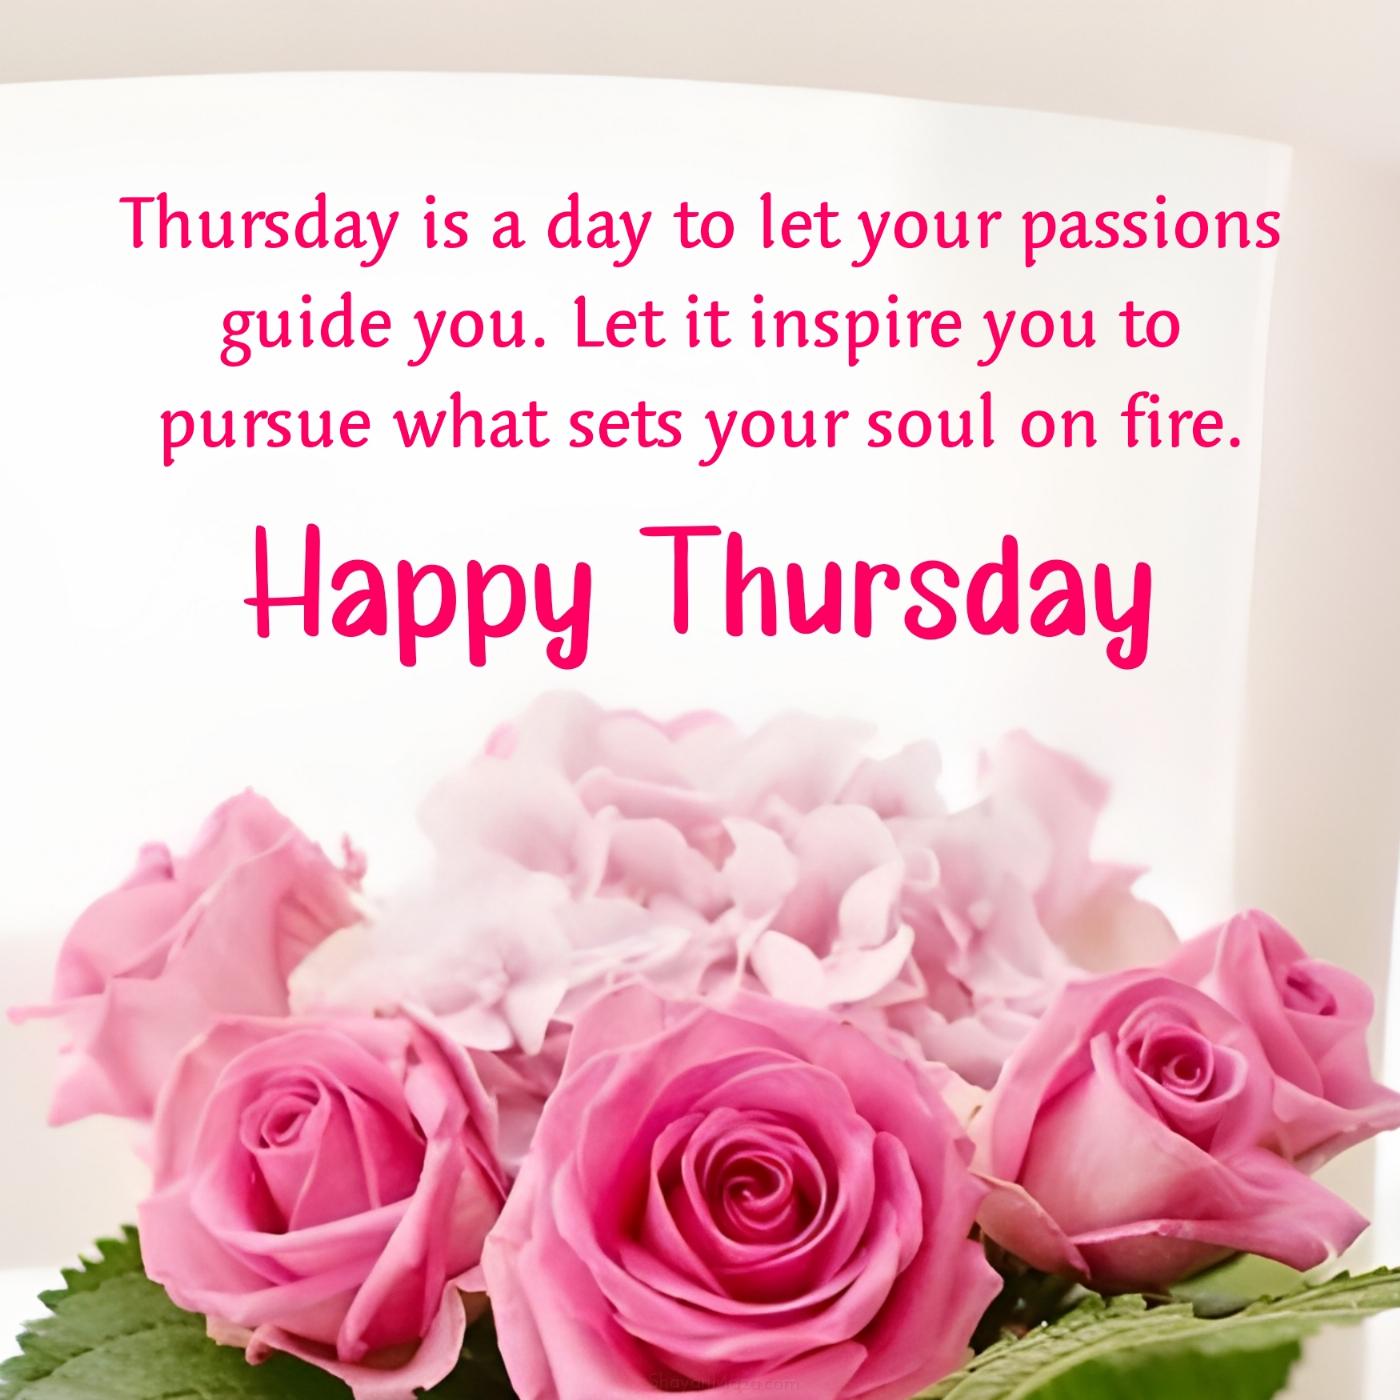 Thursday is a day to let your passions guide you